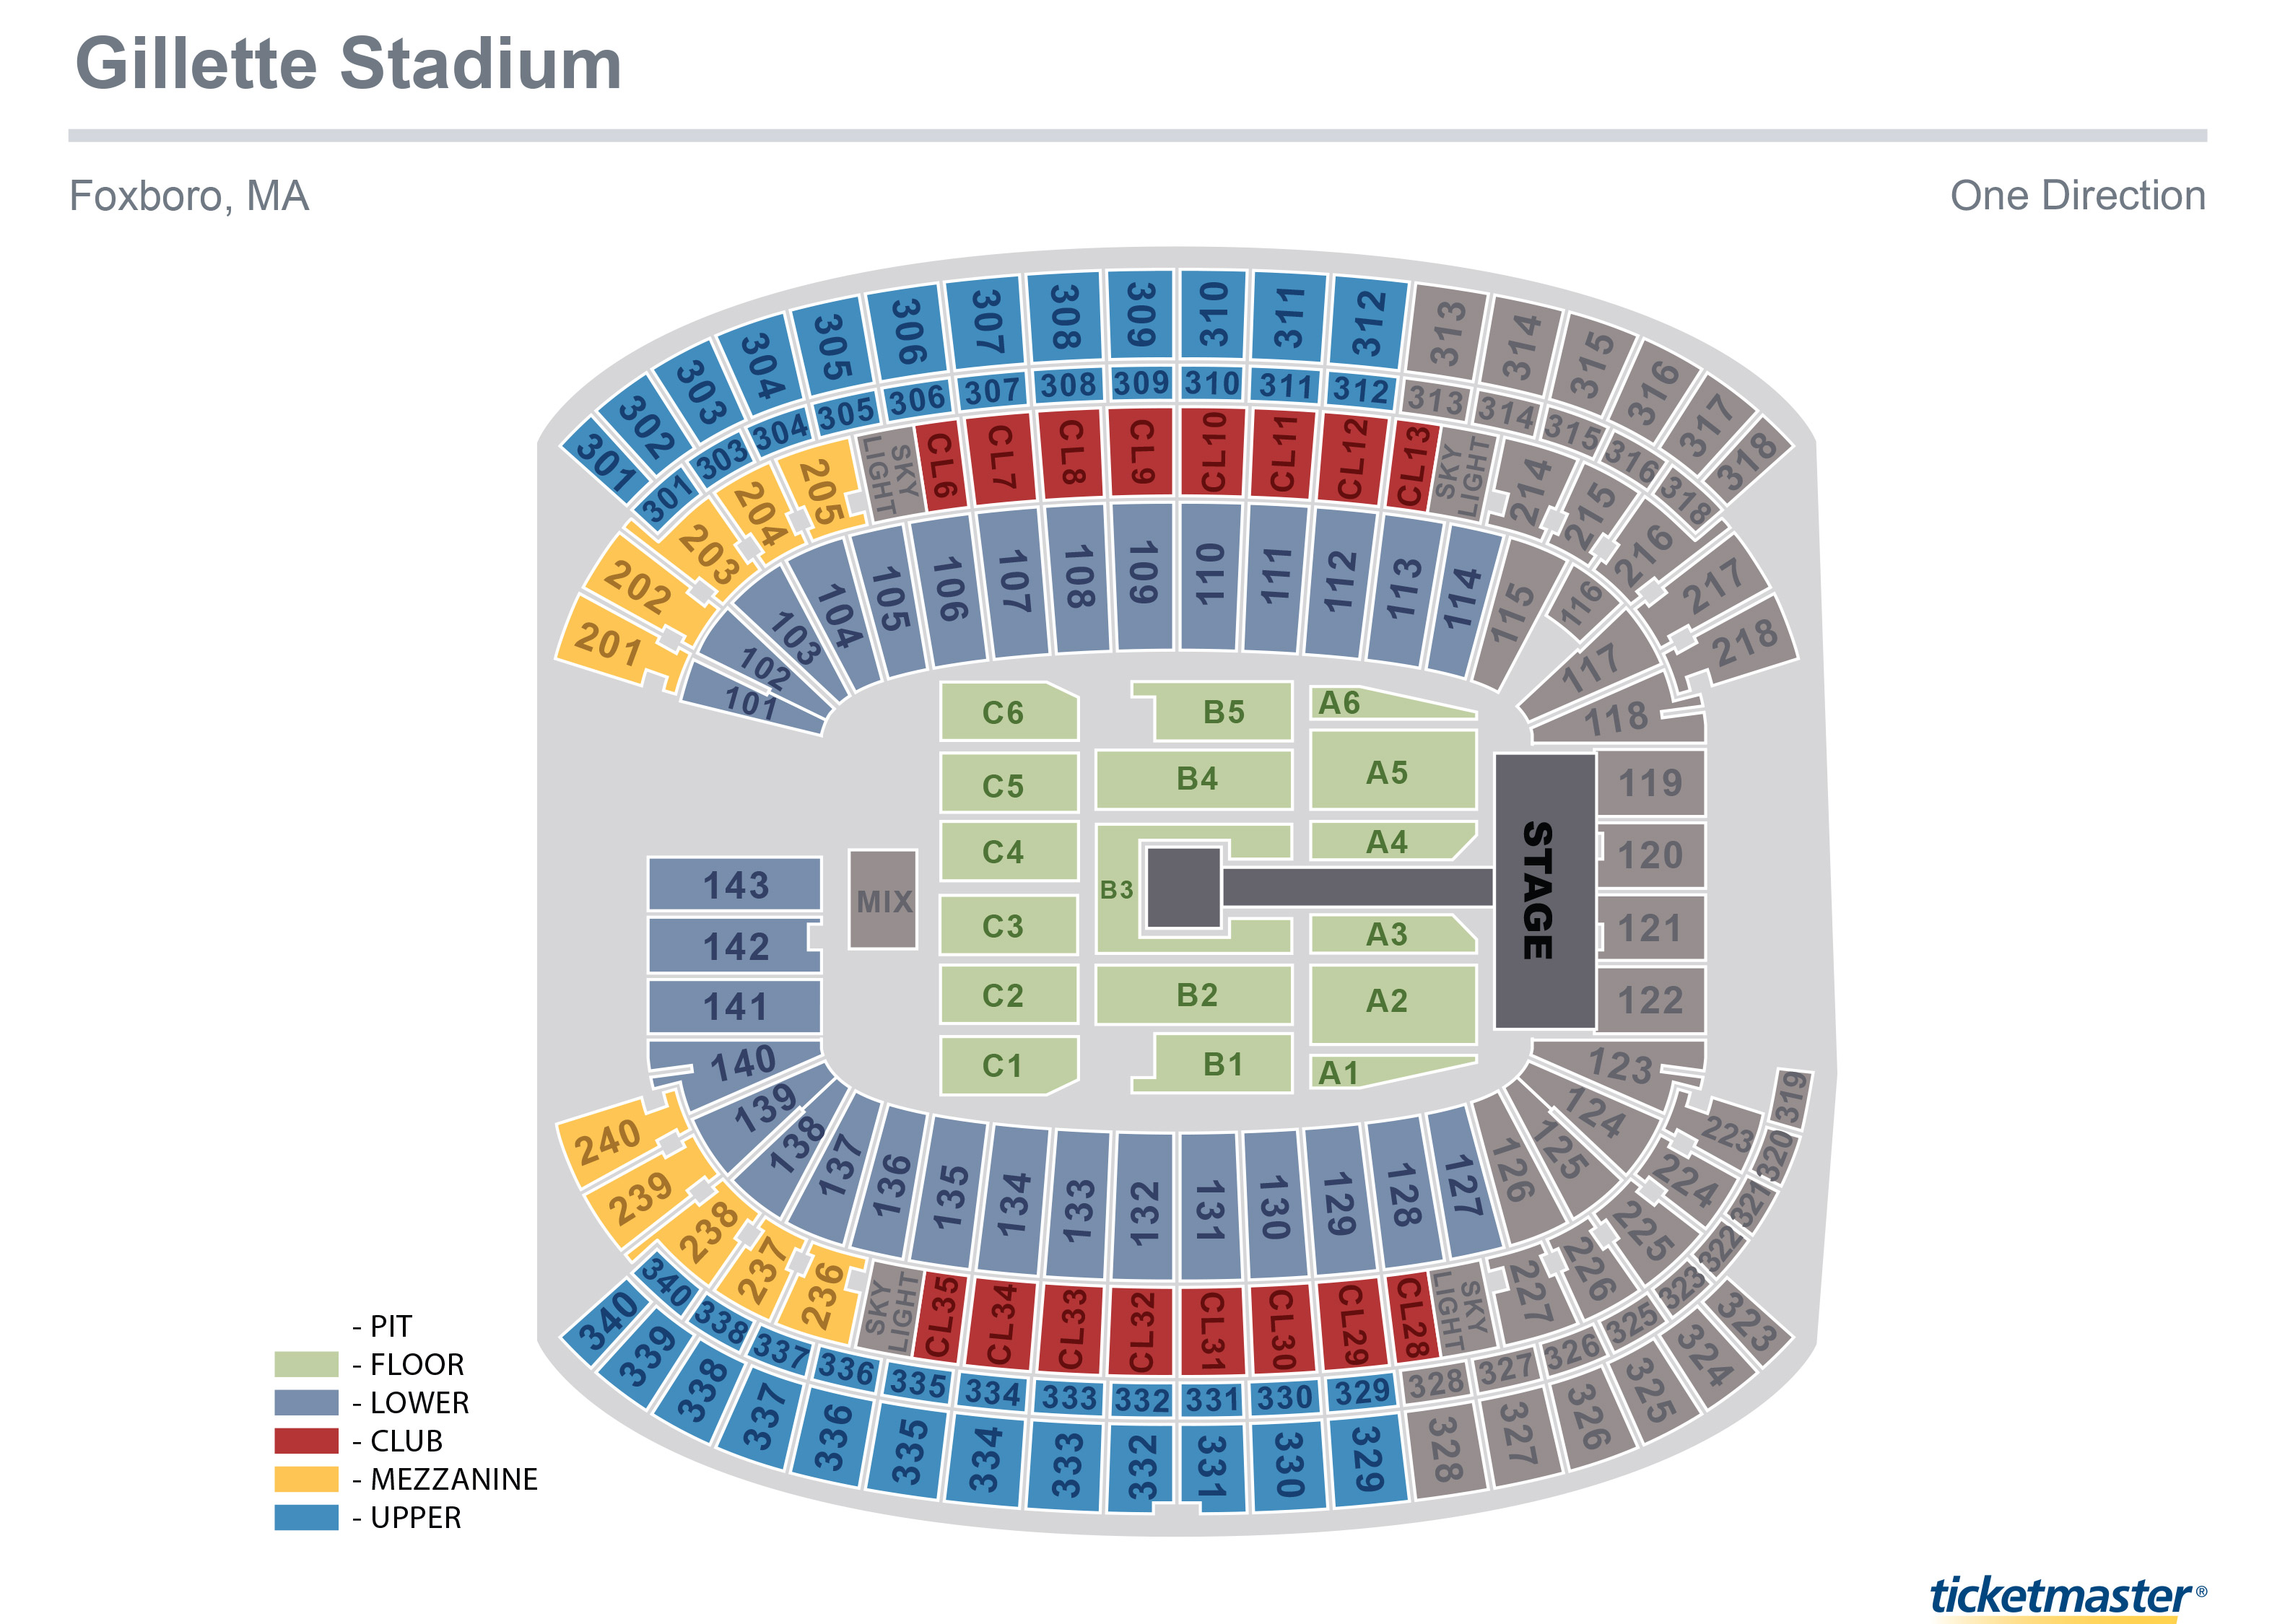 im going to the one direction concert at gillette stadium I am in